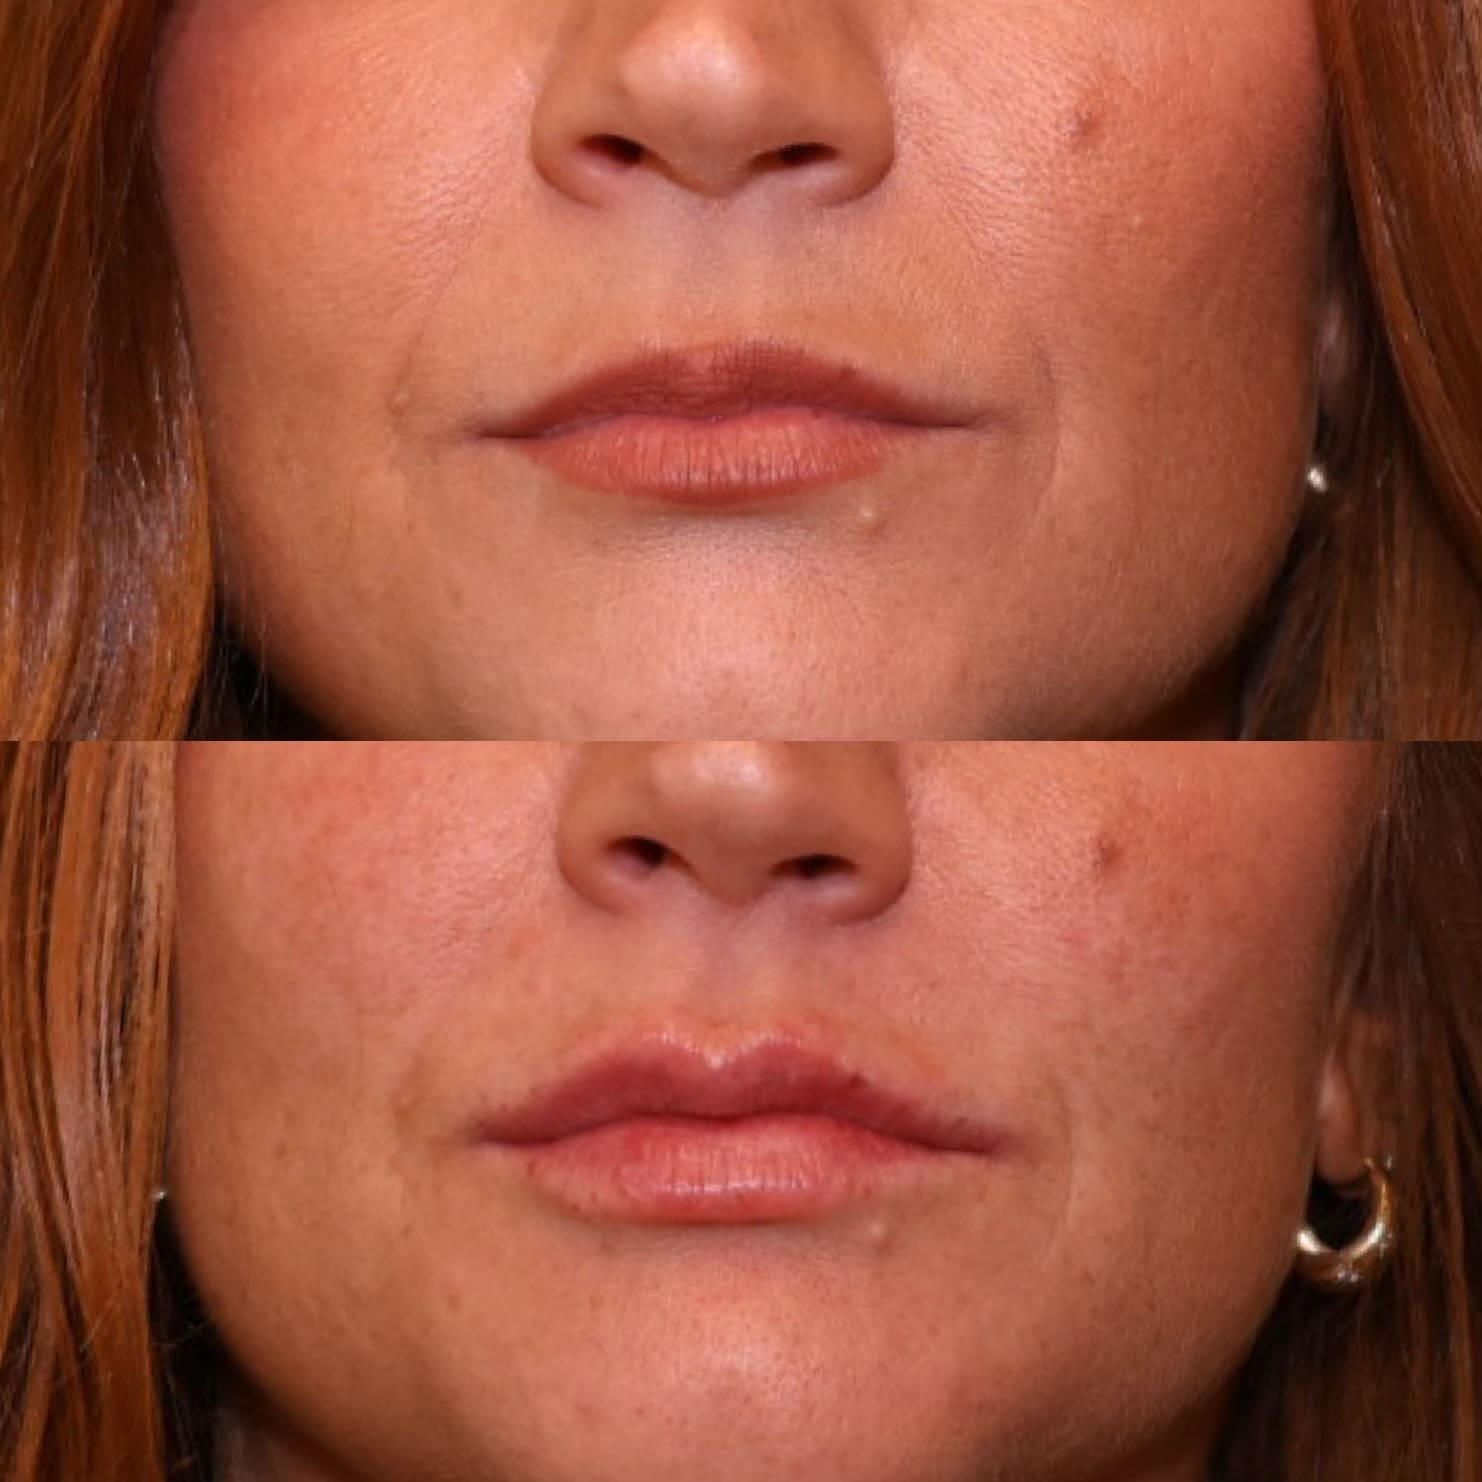 Patient before and after lip filler, front closeup view